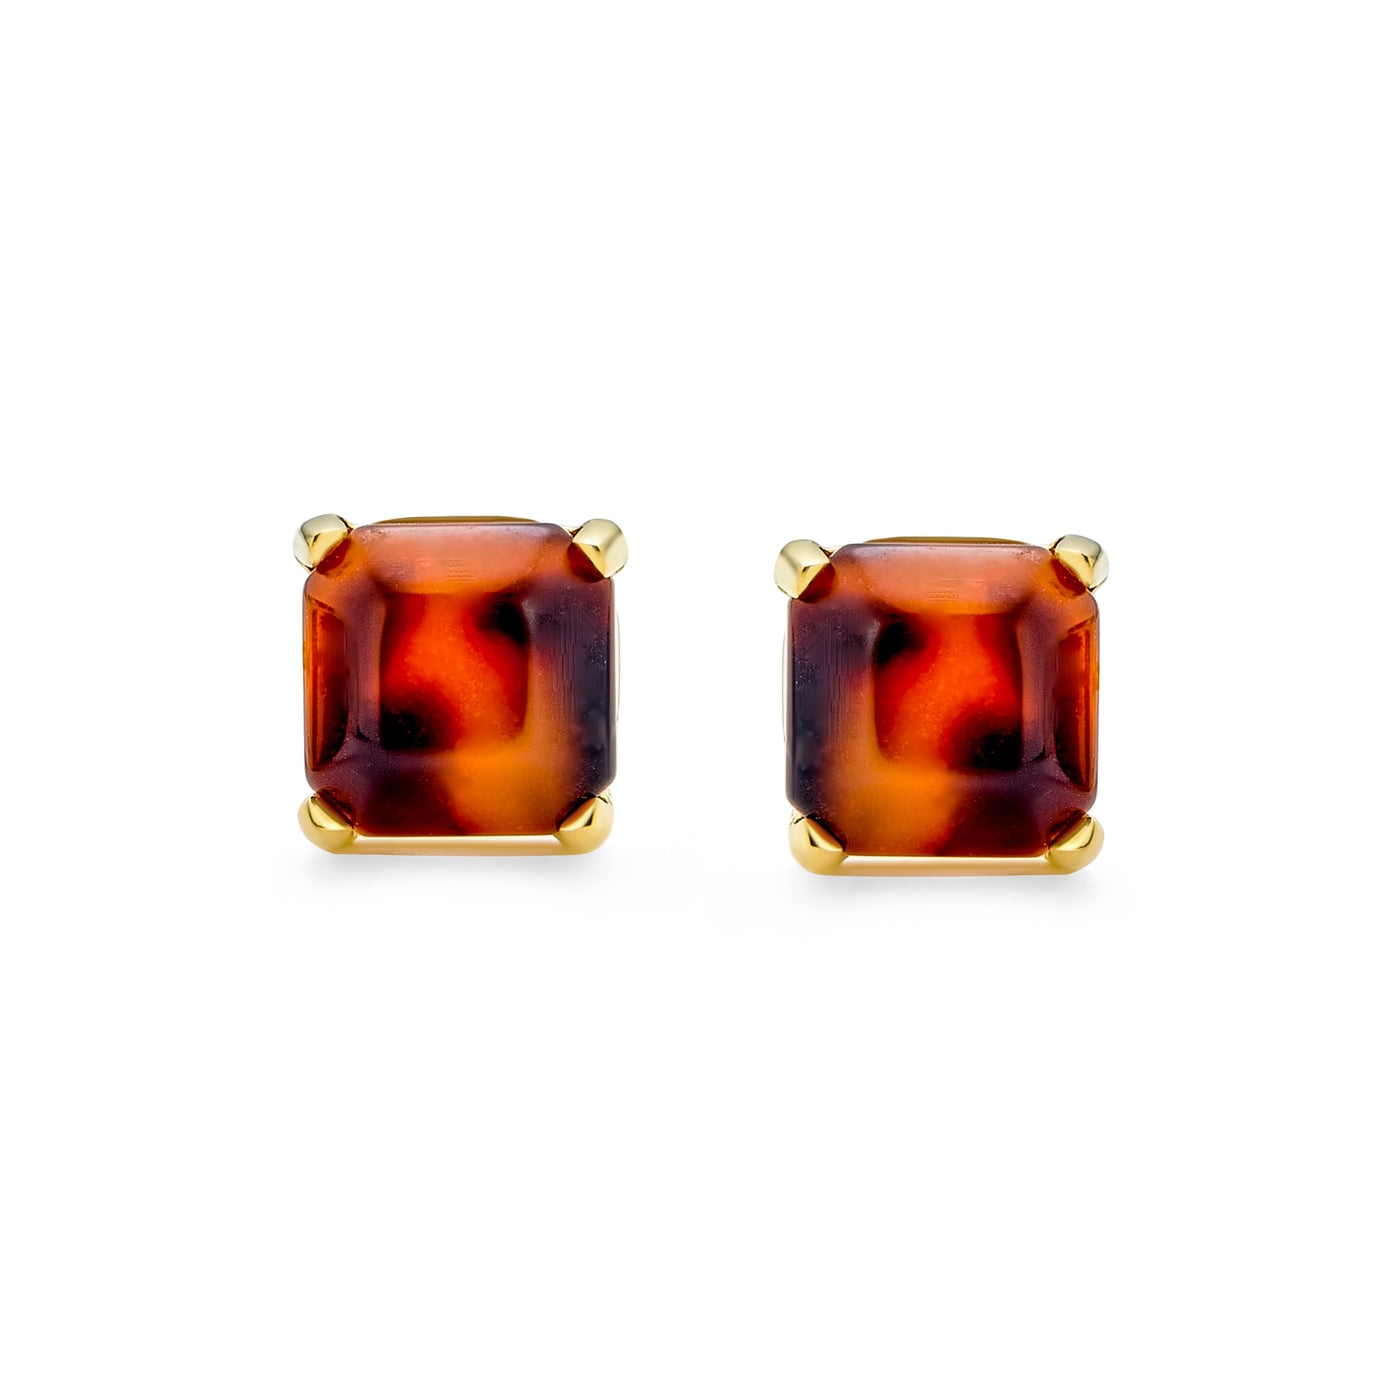 Brown Cushion Tortoise Stud Earring Gold Plated Stainless Steel